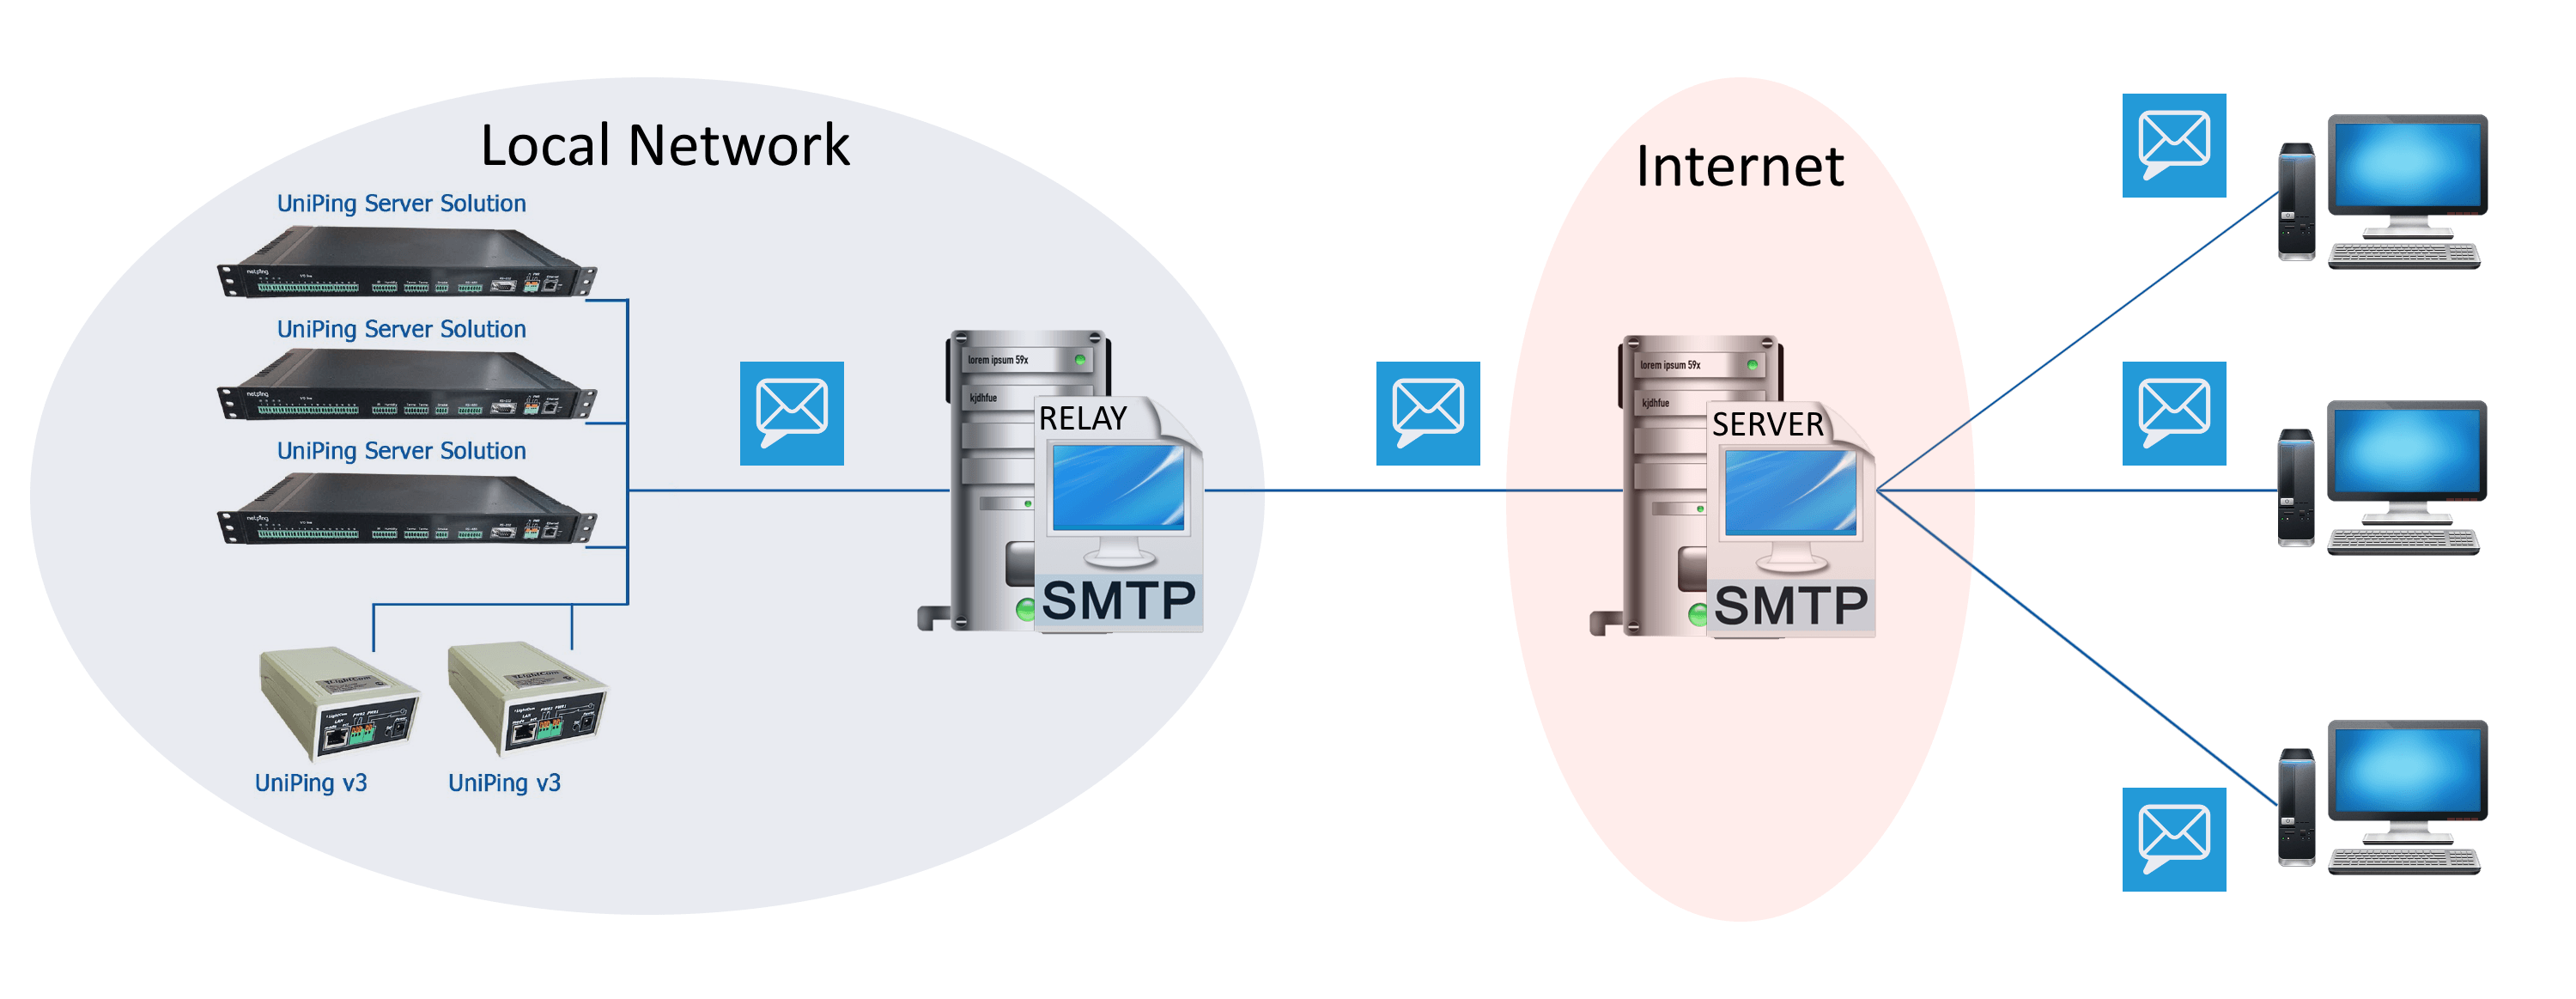 serialmailer could not connect to smtp server